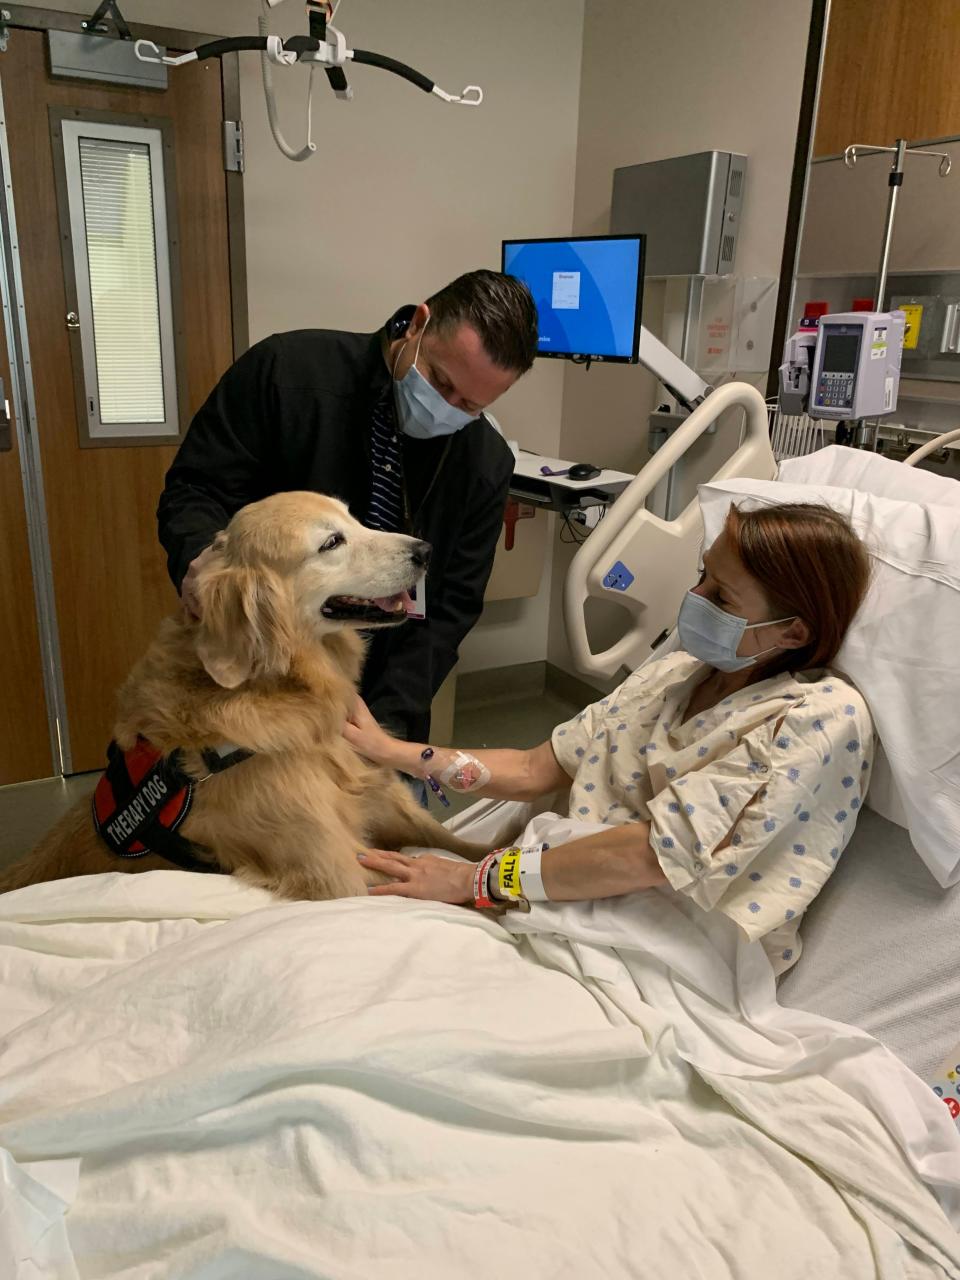 Therapy dog Yeti and his handler visit Victoria Threadgould at Dell Seton Medical Center the day after her kidney donation last week.